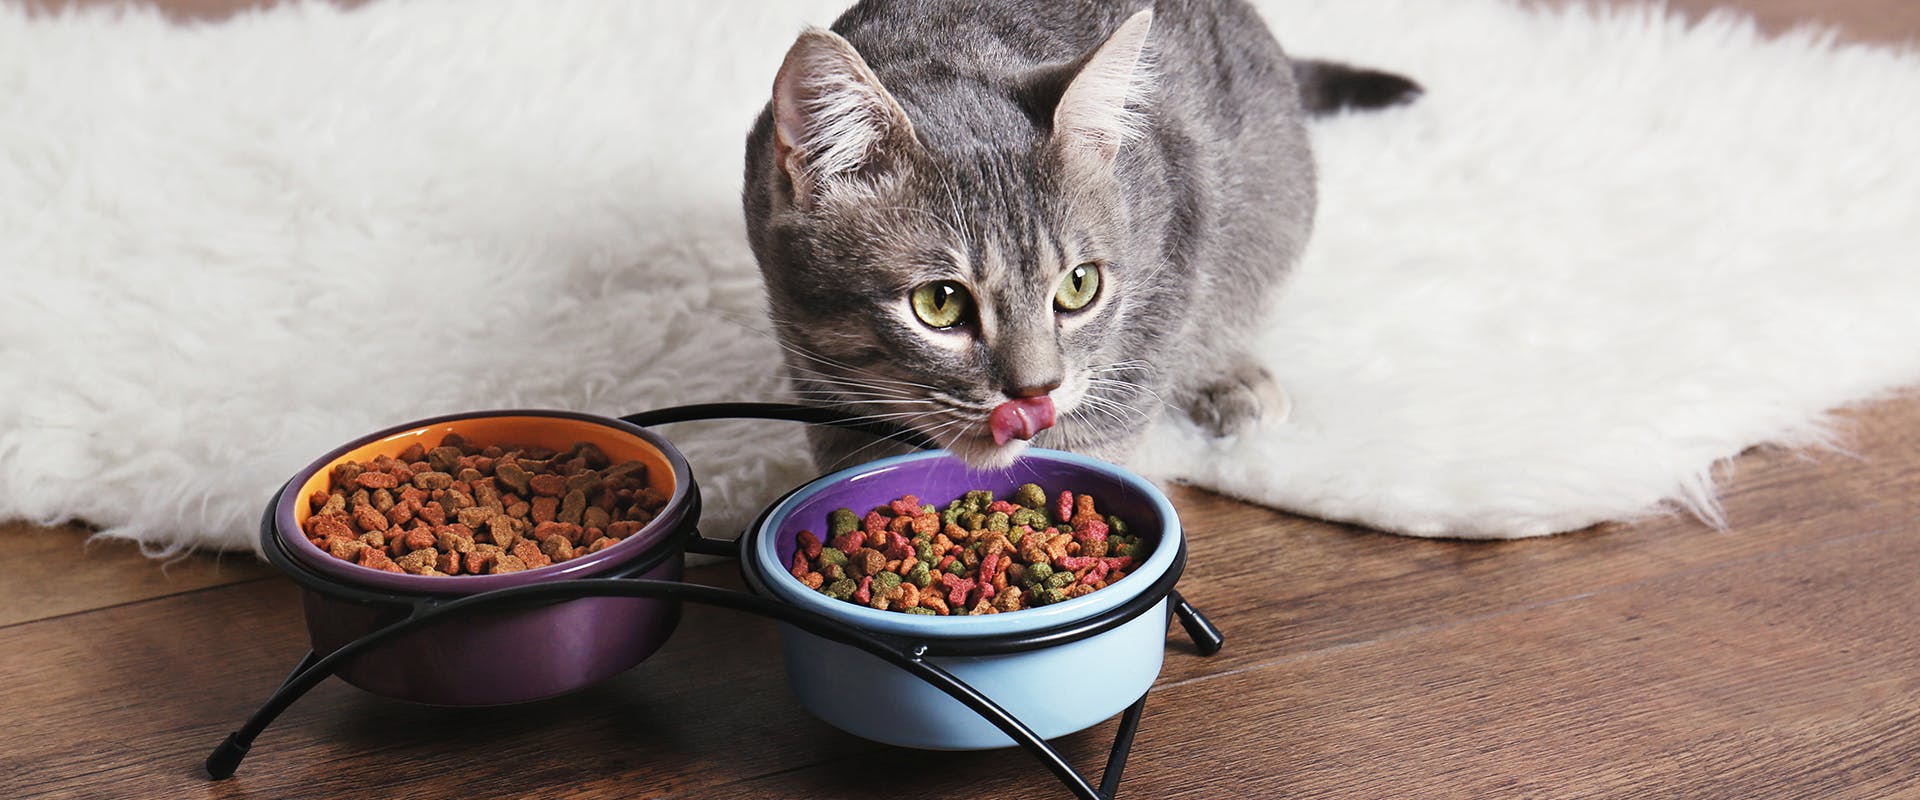 A cat eating from a food bowl, licking its lips